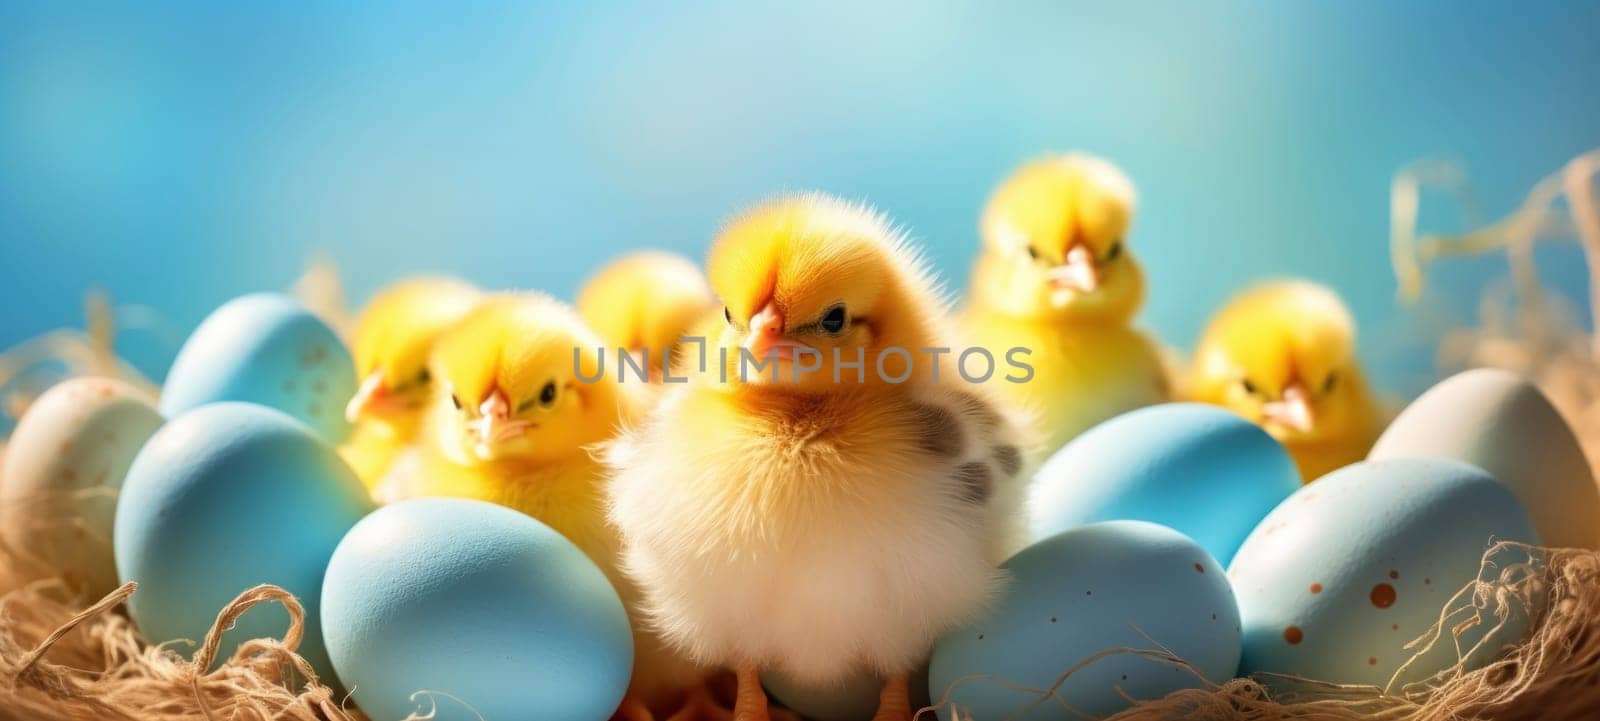 Fluffy chicks among pastel-colored Easter eggs